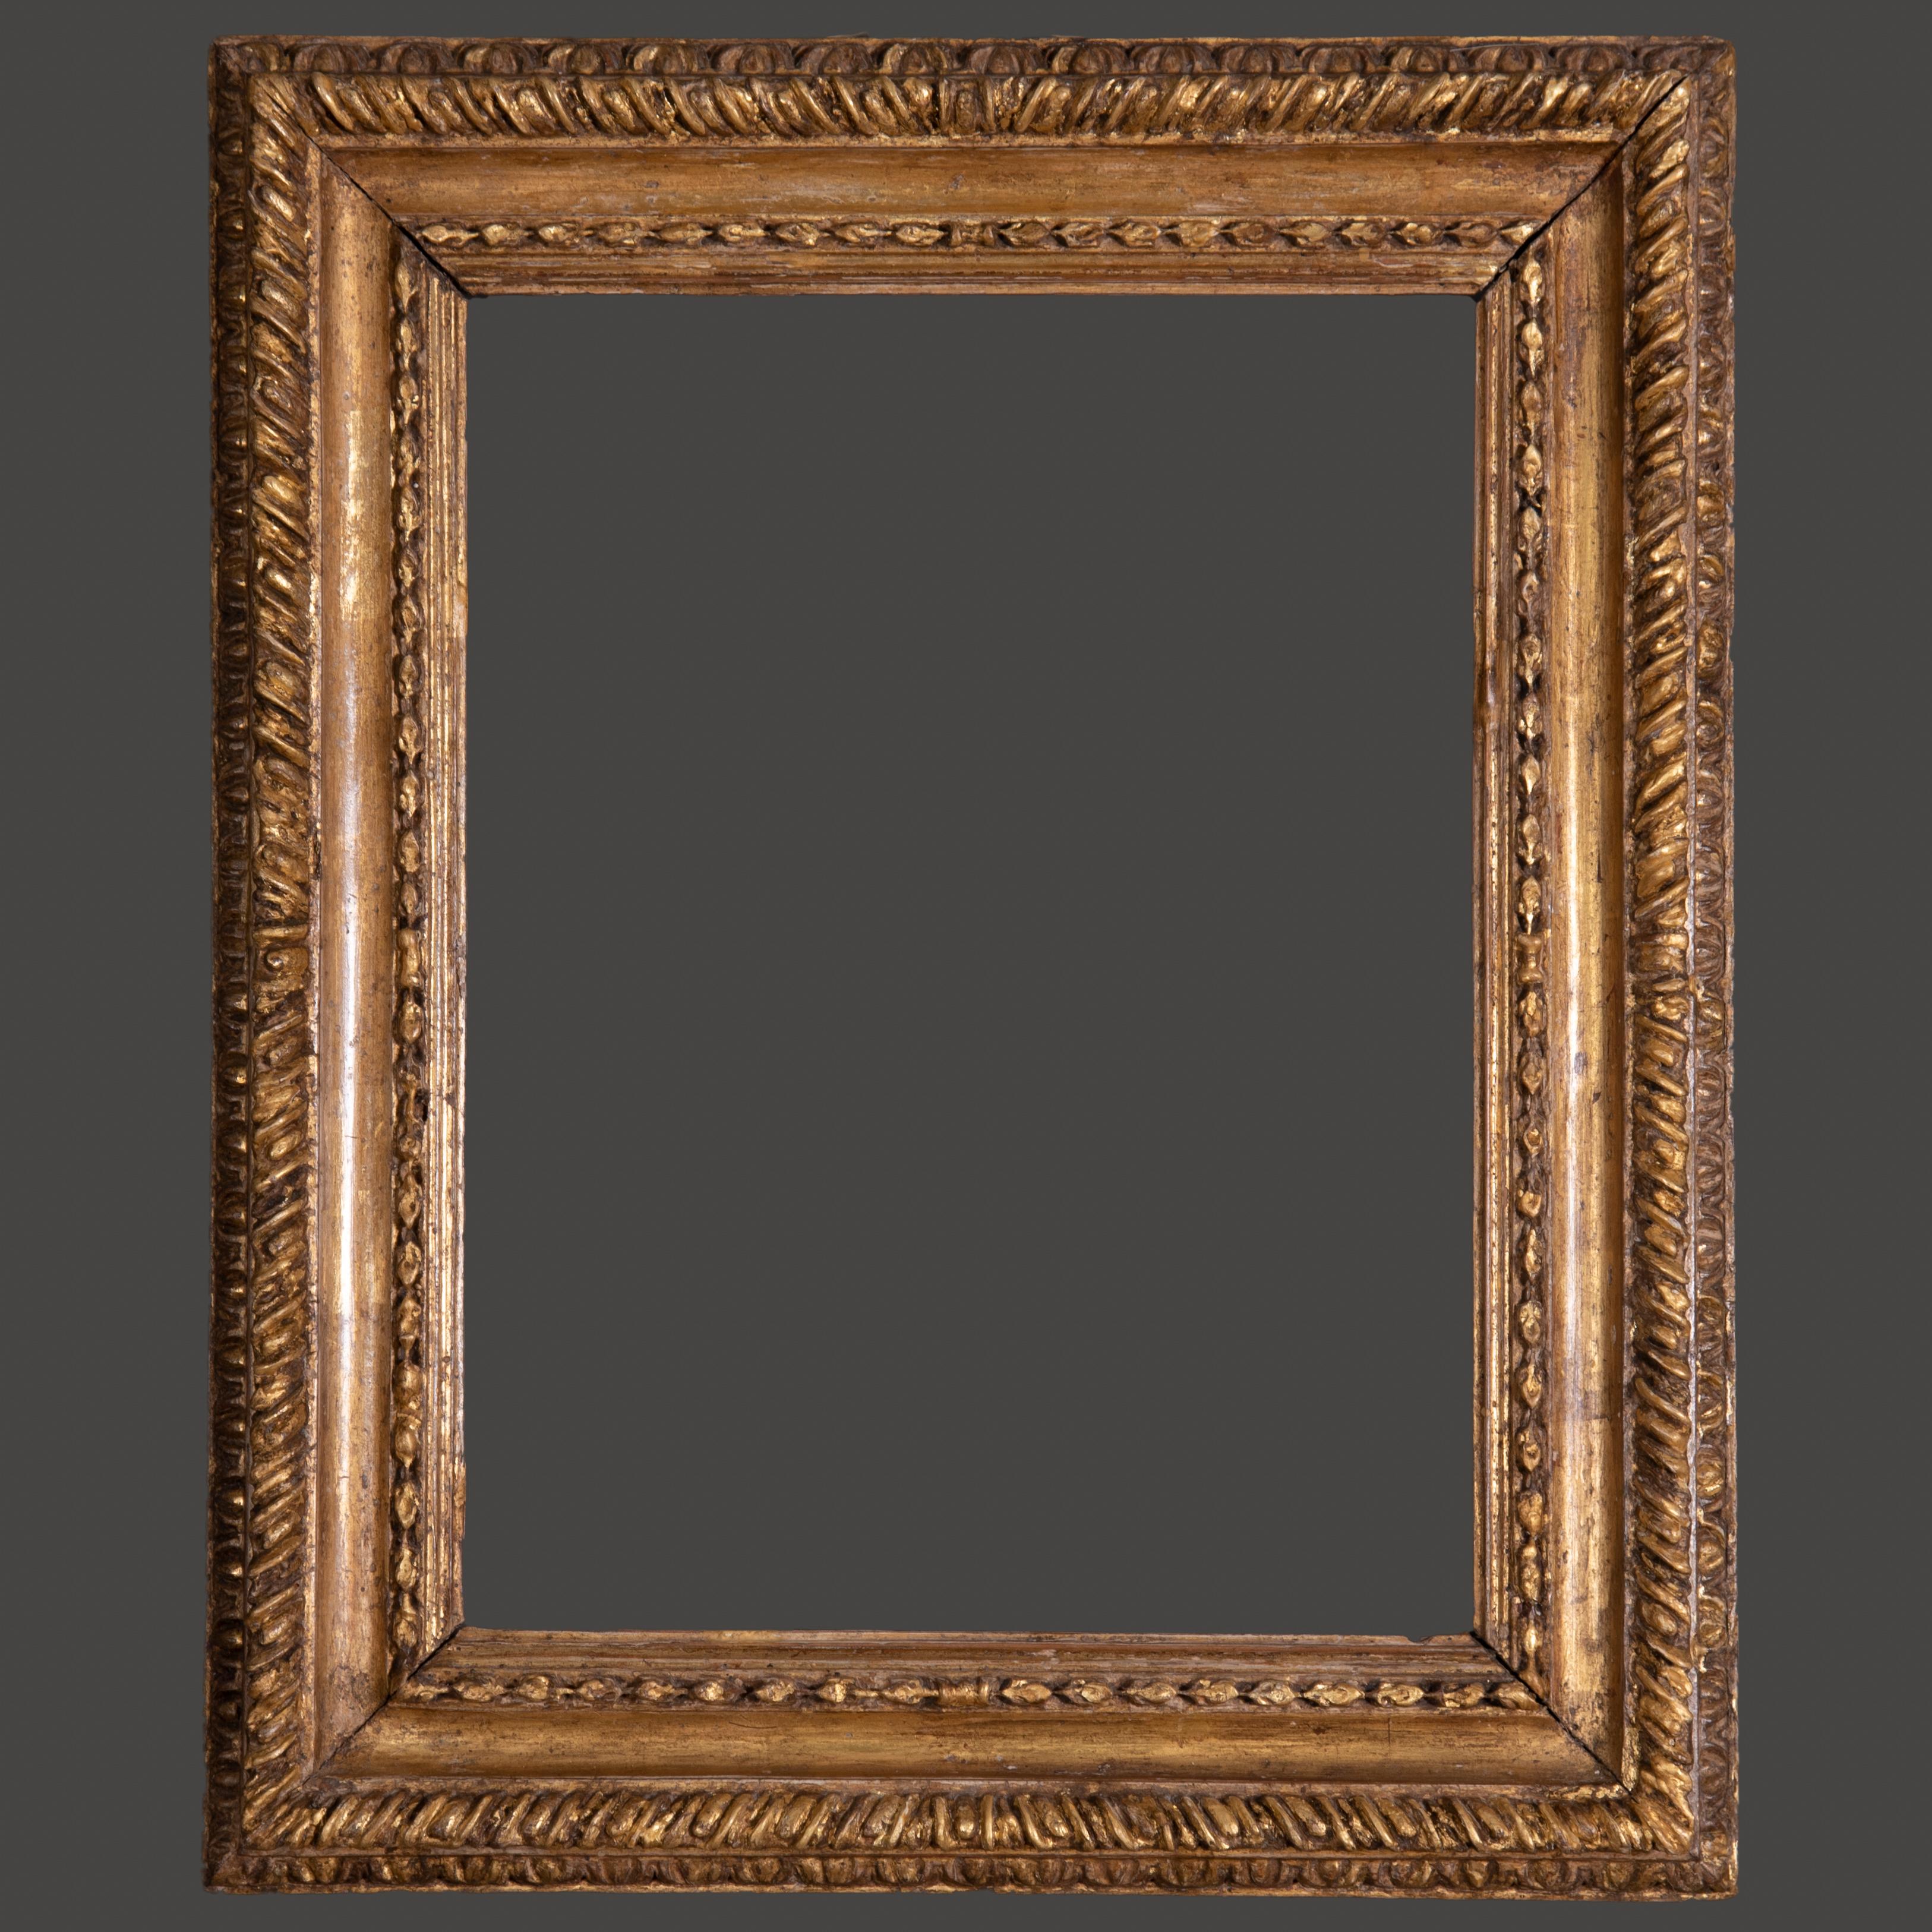 Early 18th Century Italian Salvator Rosa Gilded Frame For Sale 2